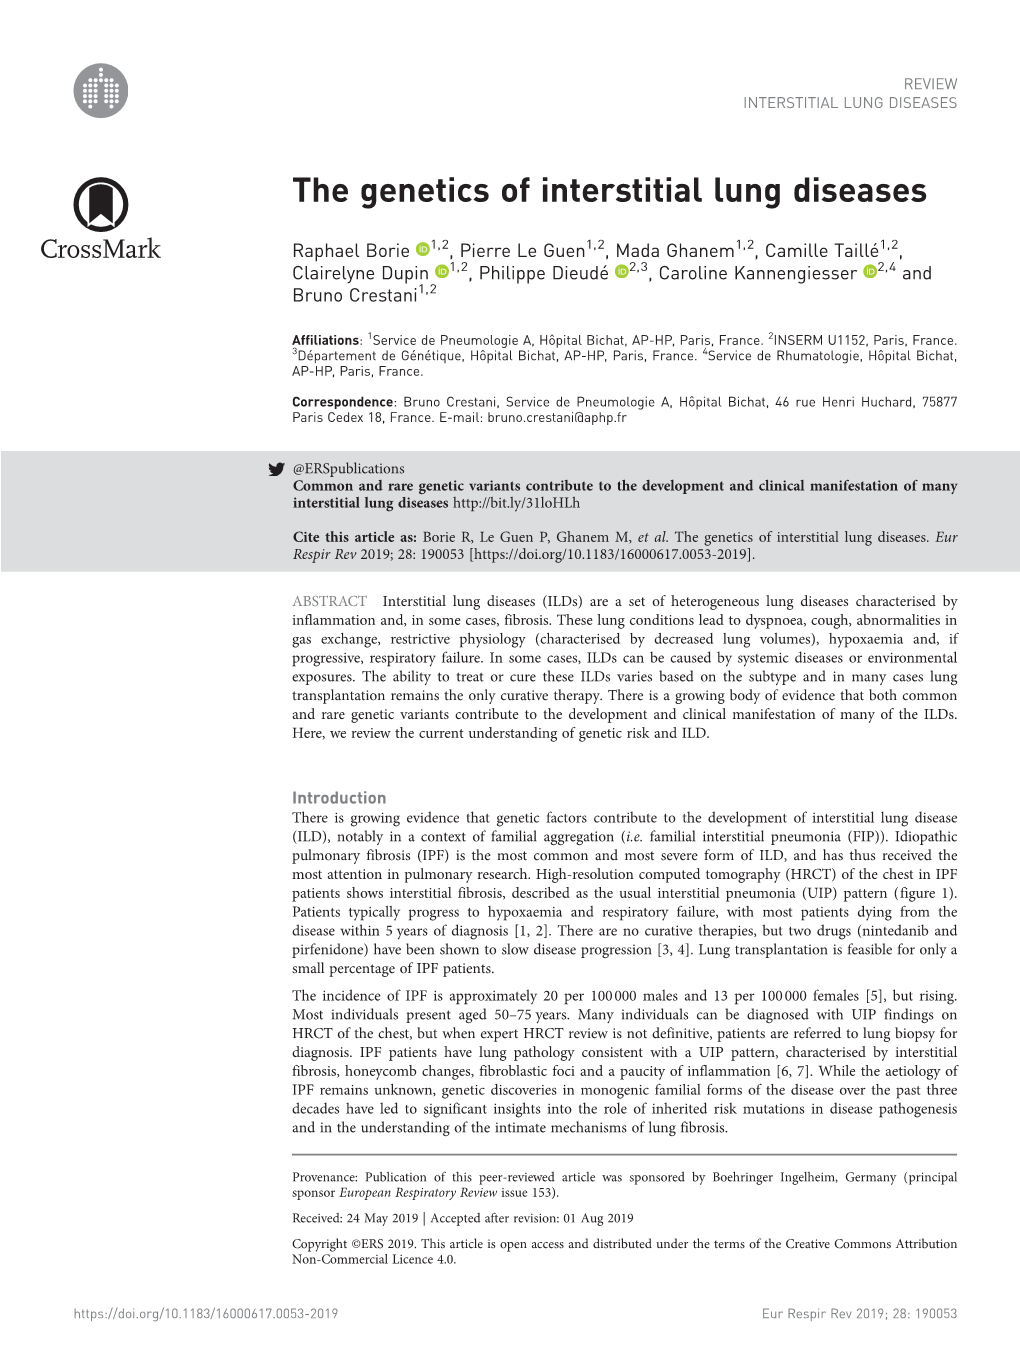 The Genetics of Interstitial Lung Diseases